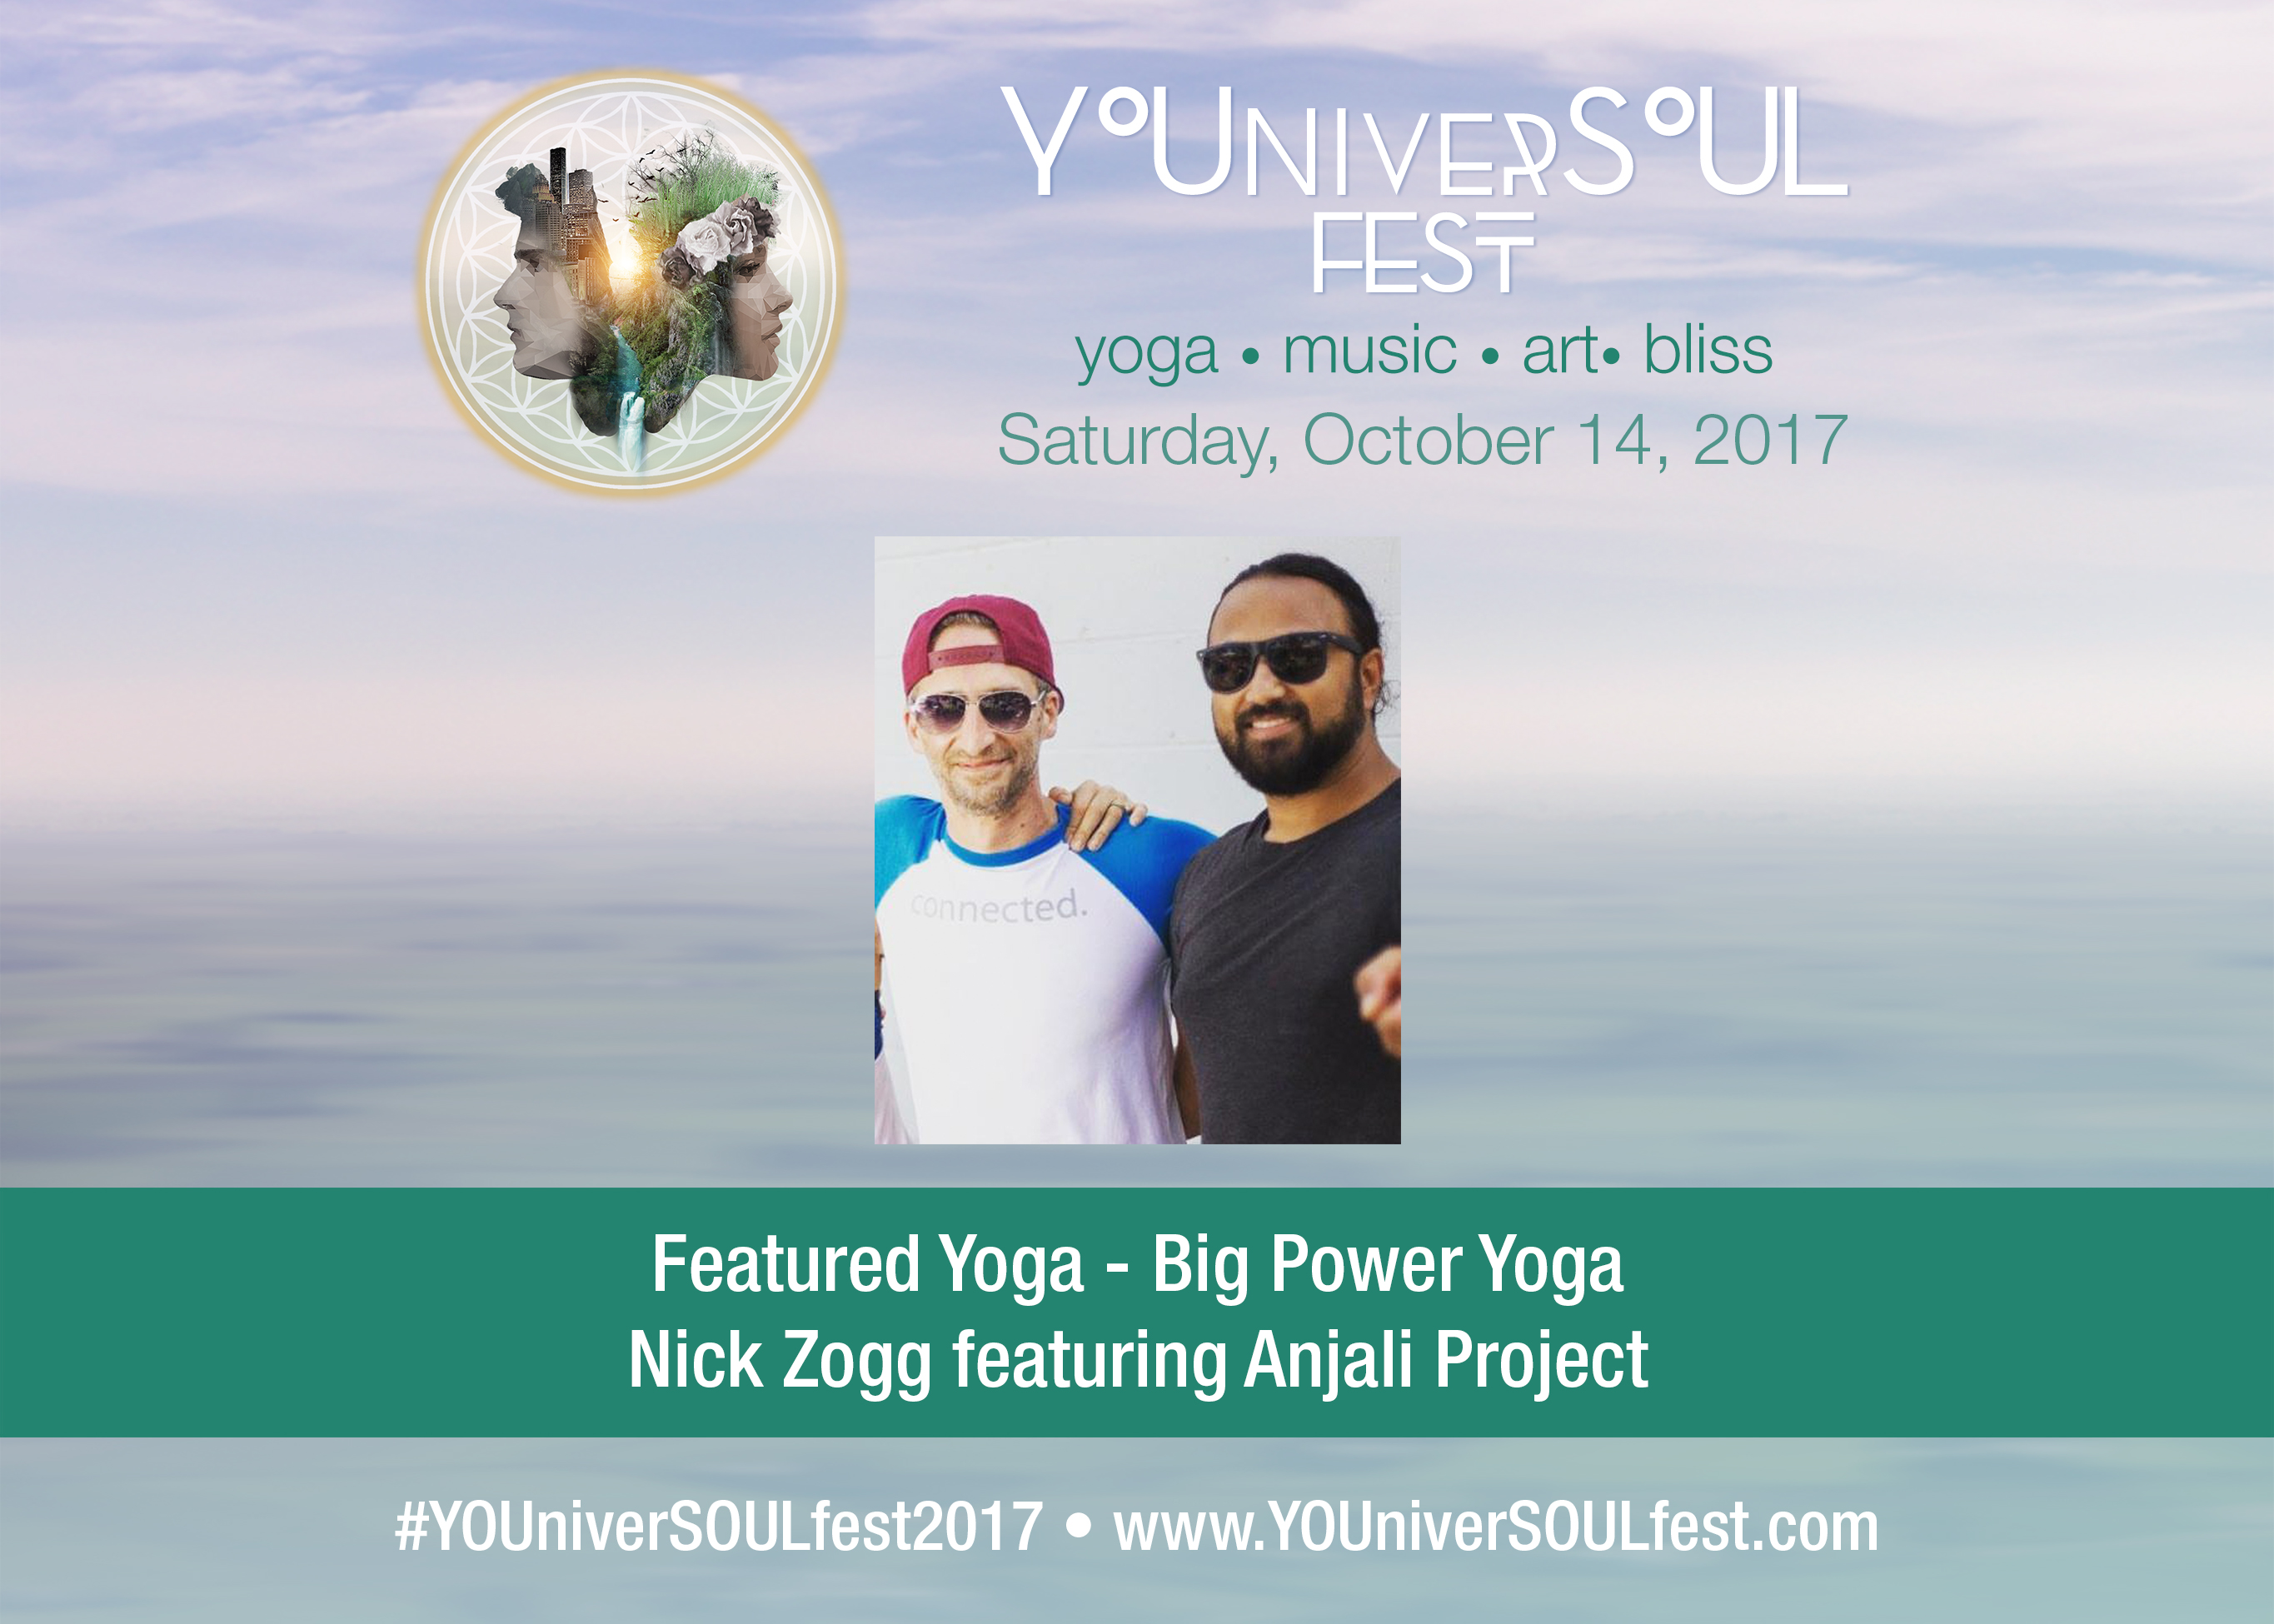 Big Power Yoga Featuring Nick Zogg and Anjali Project